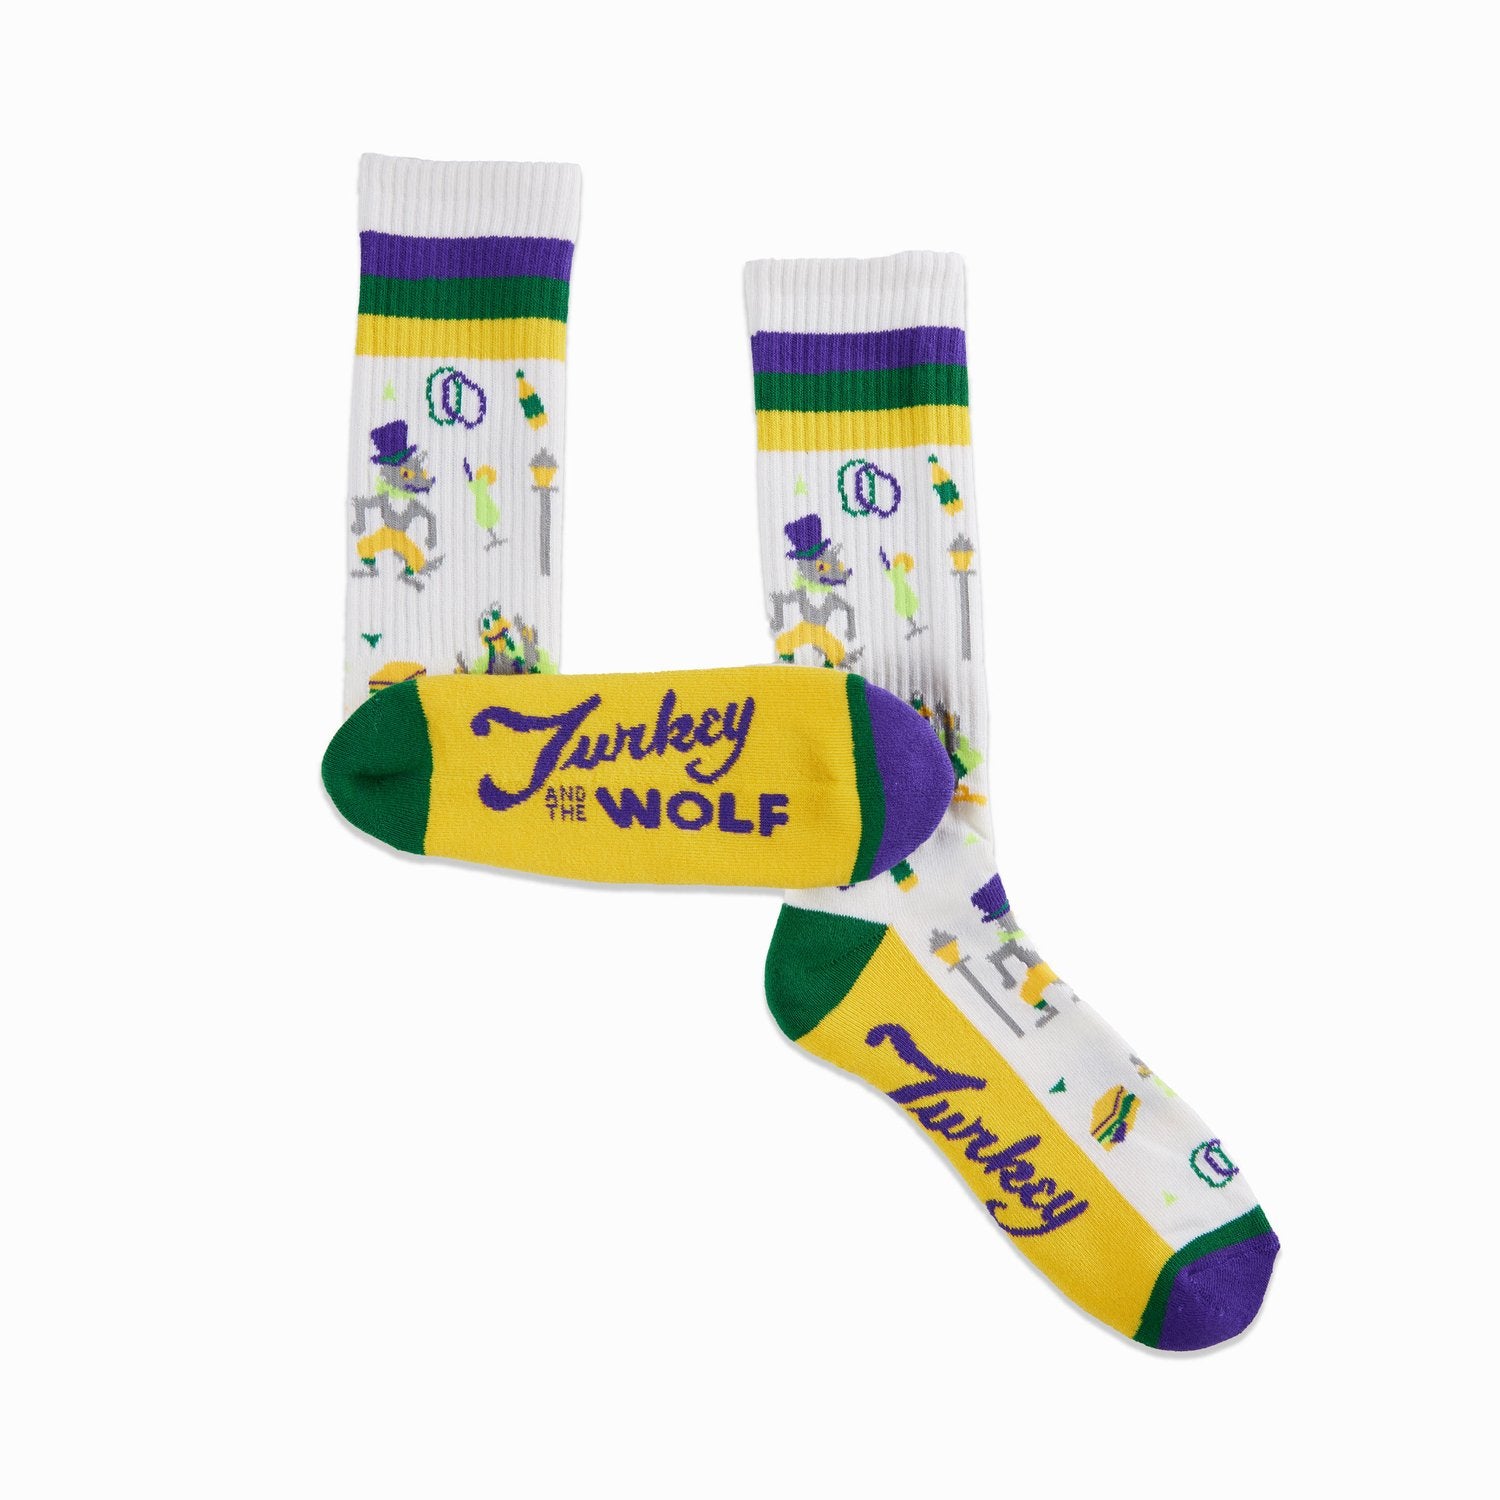 A pair of socks featuring happy wolves, adding a touch of cheerfulness to your outfit.